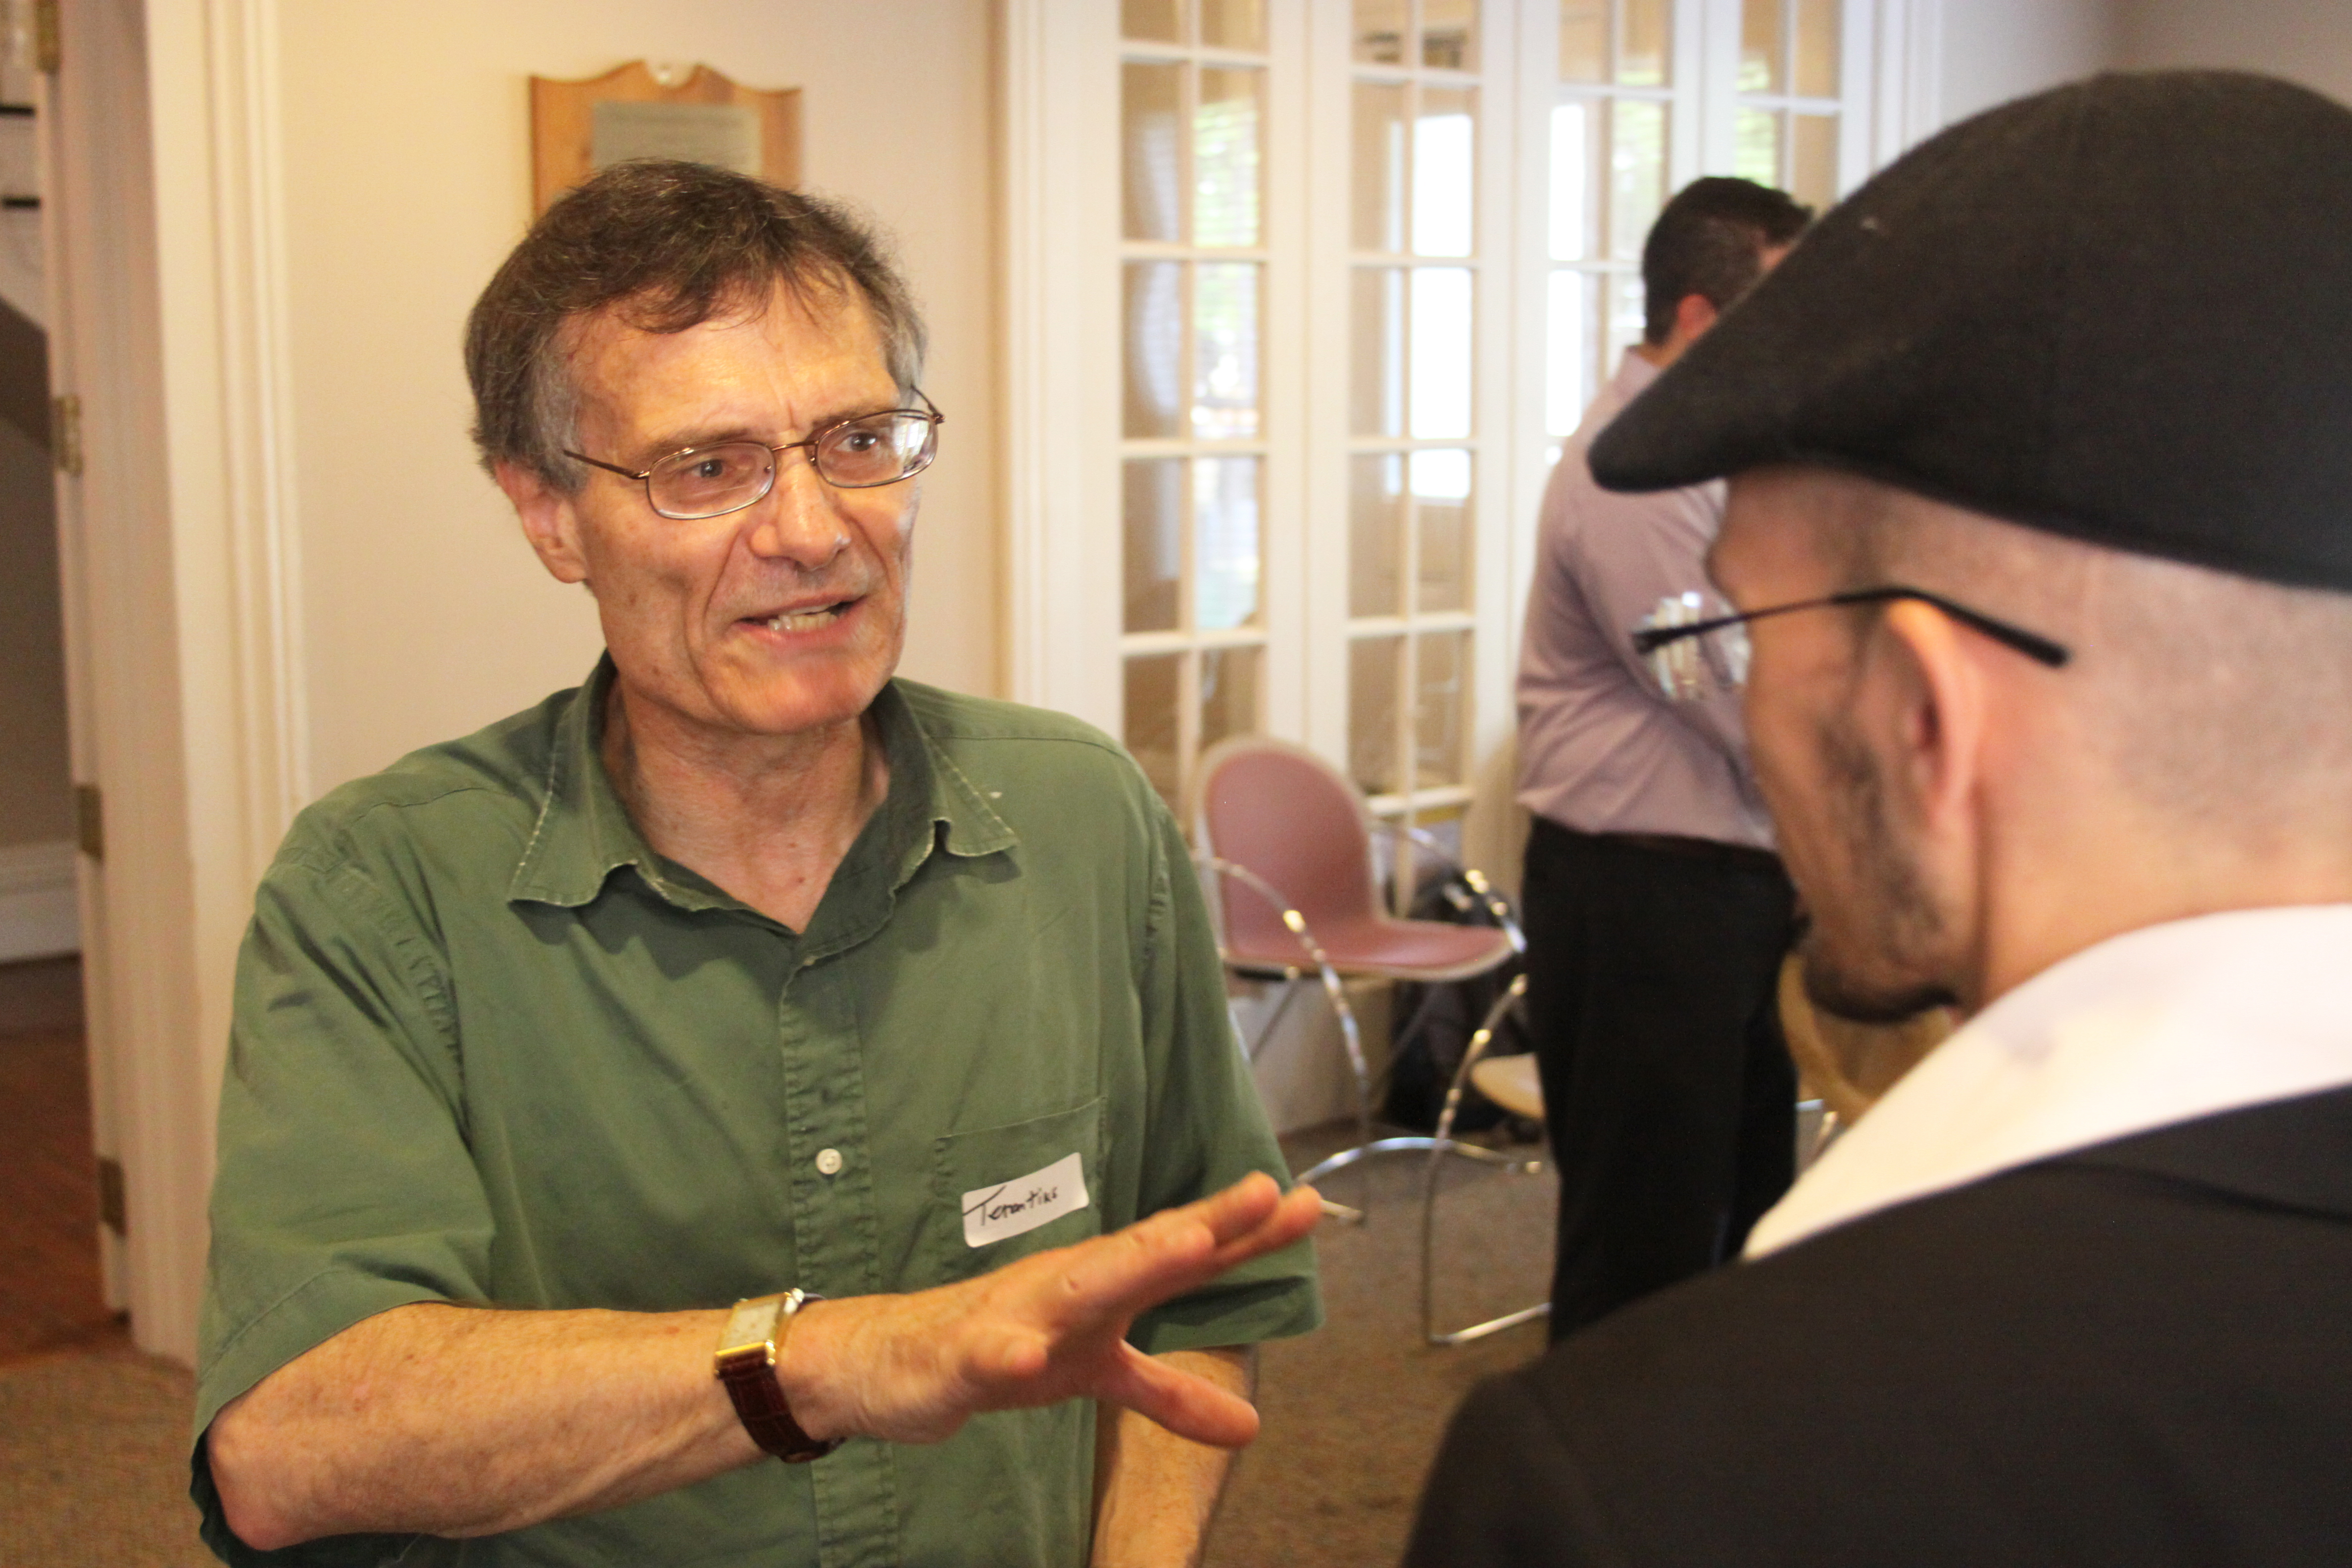 Terence Tunberg greets others at conference, in Latin, of course. Photo by Brian Manke